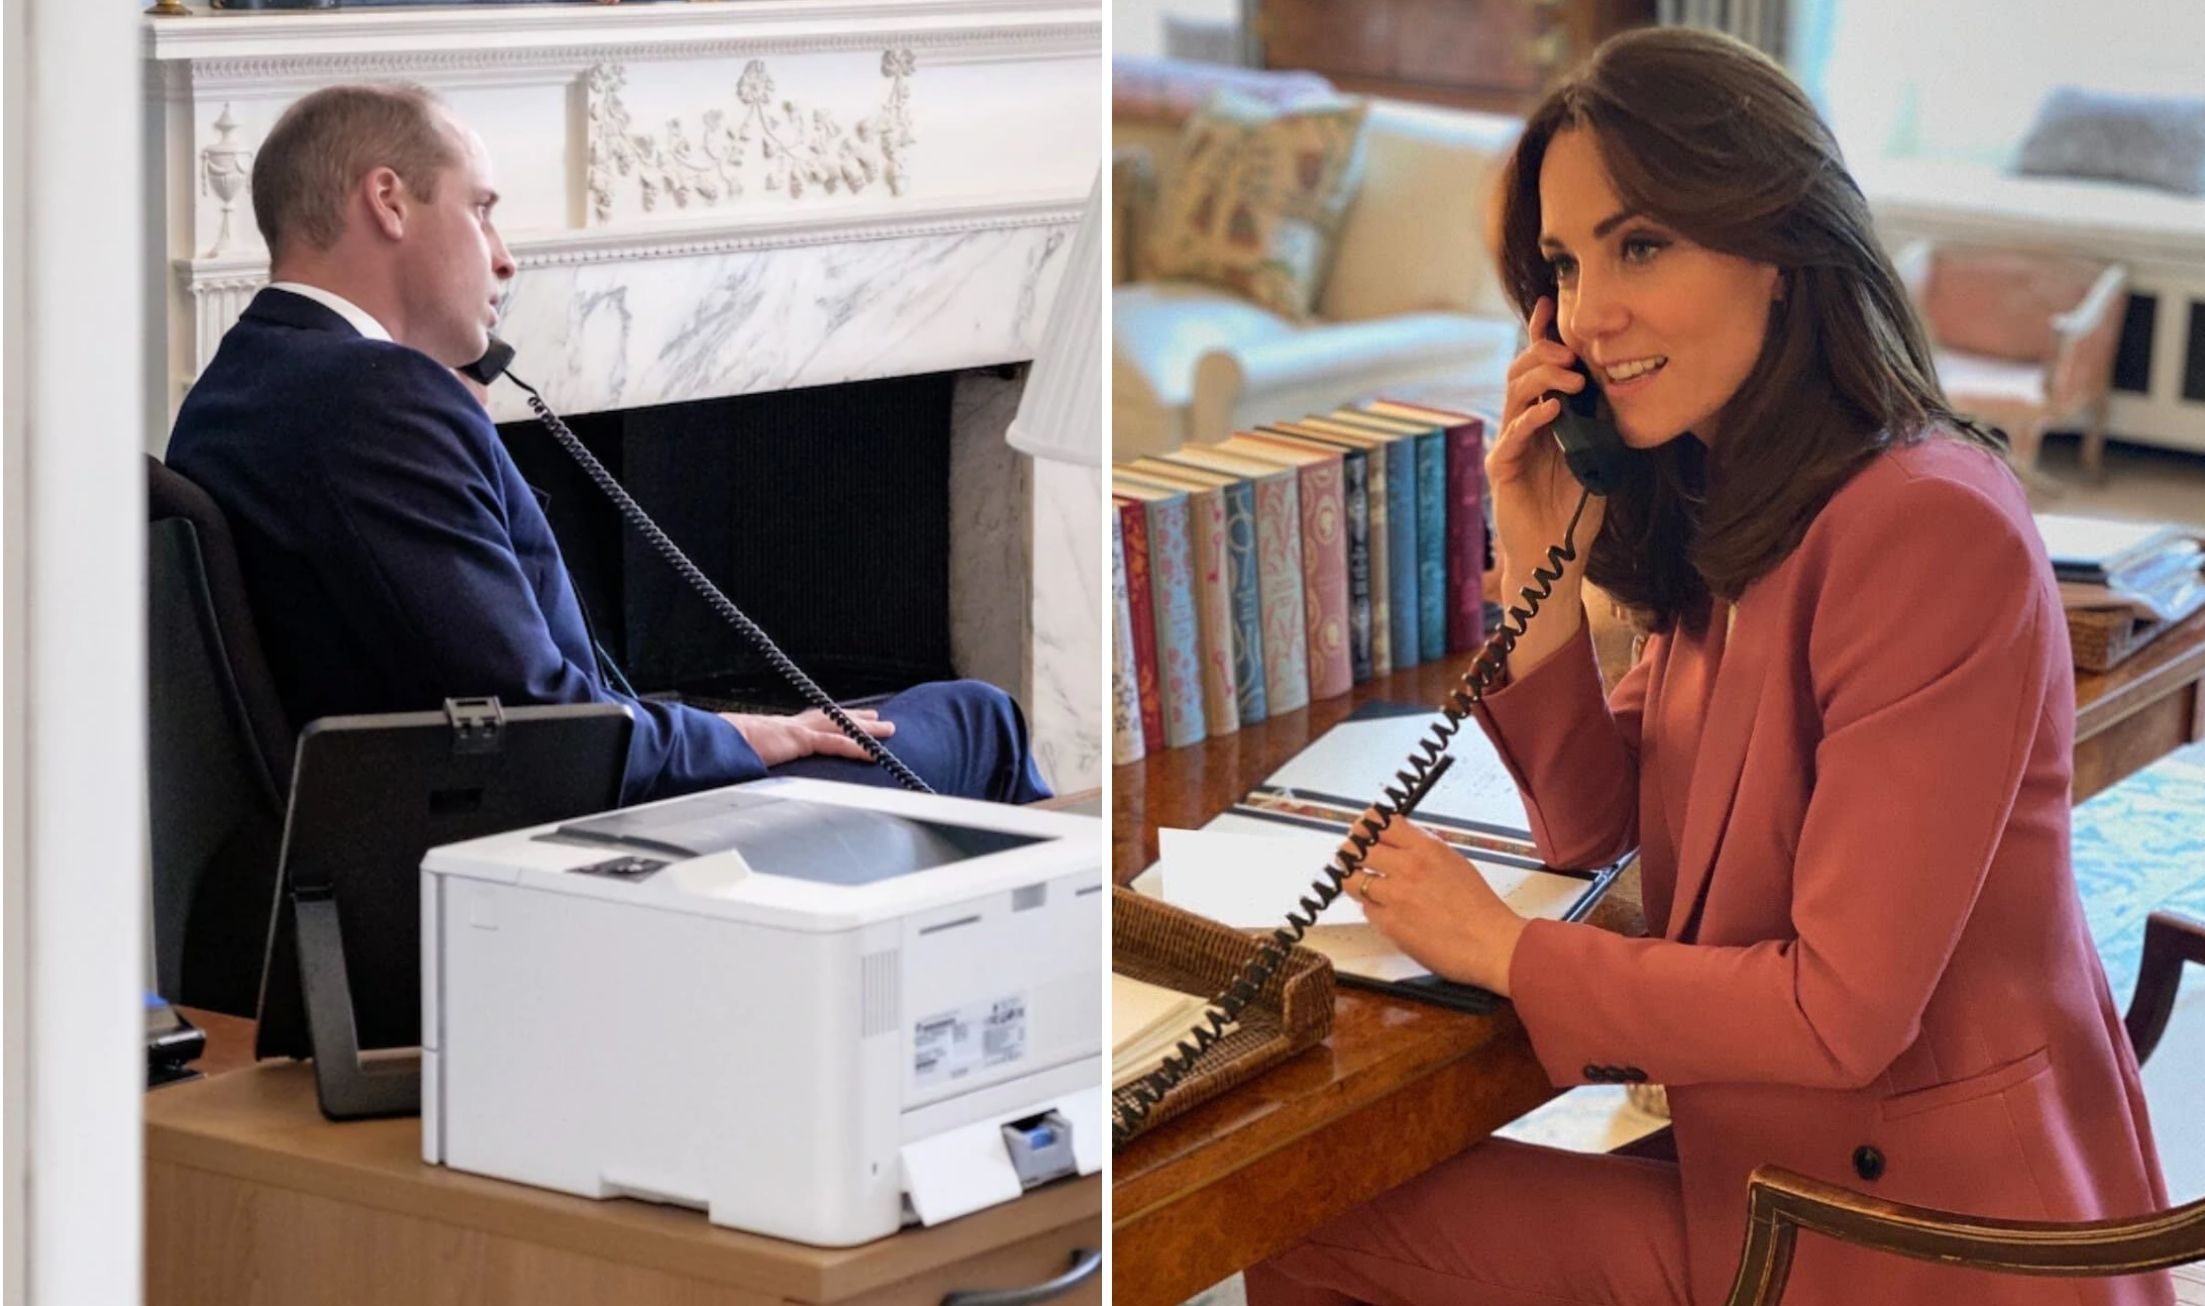 Prince William and Kate say the 'last few weeks have been anxious and unsettling for everyone' as they help launch mental health guidance